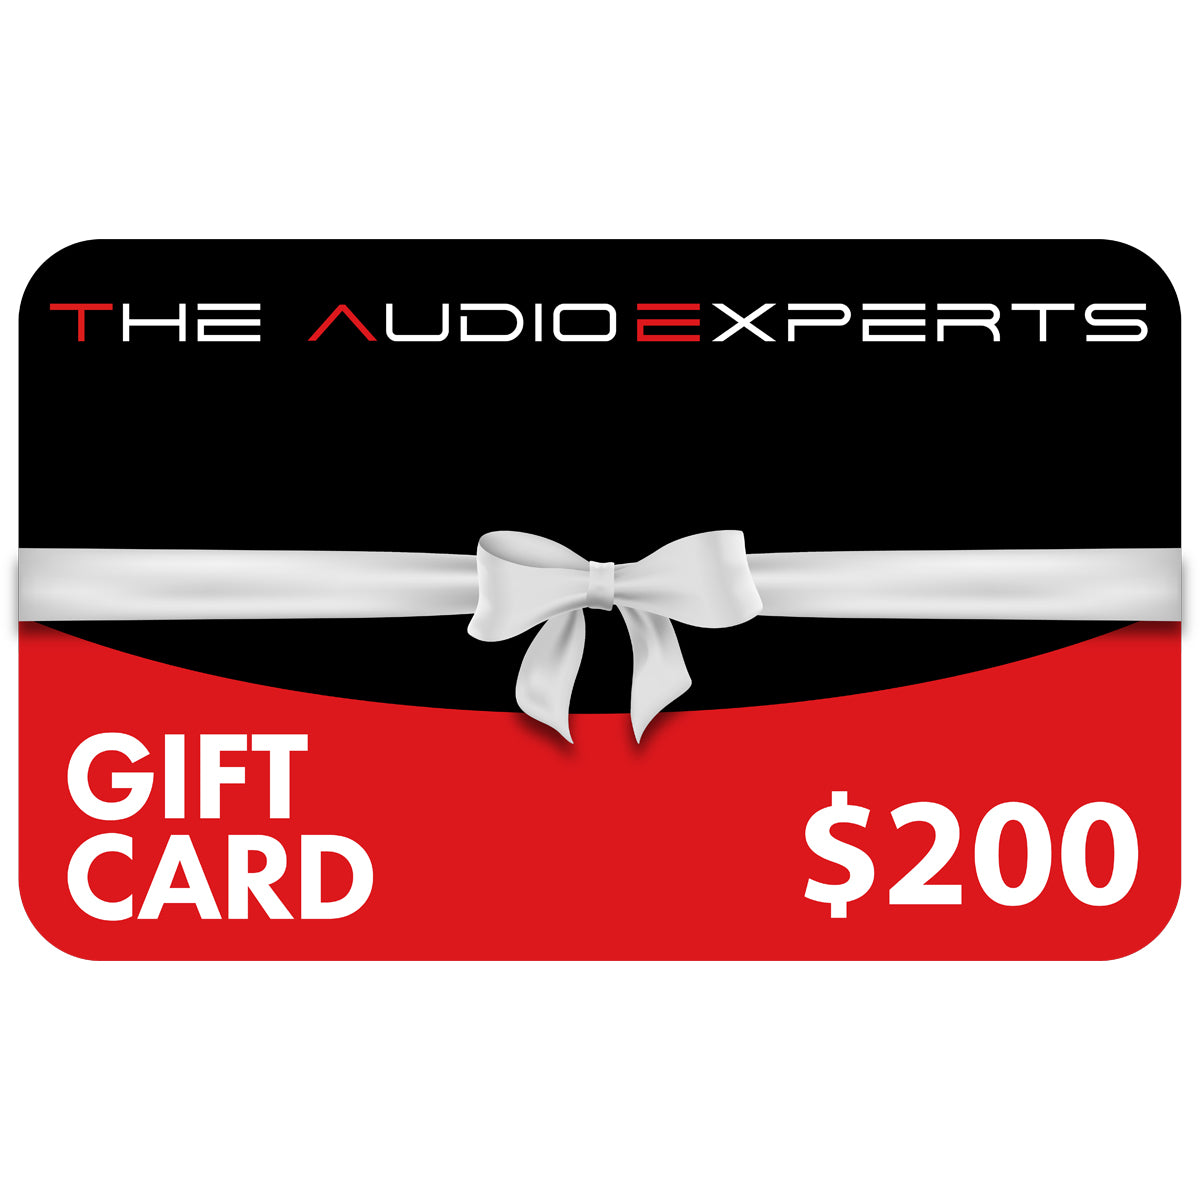 Gift Card - A$200 - The Audio Experts